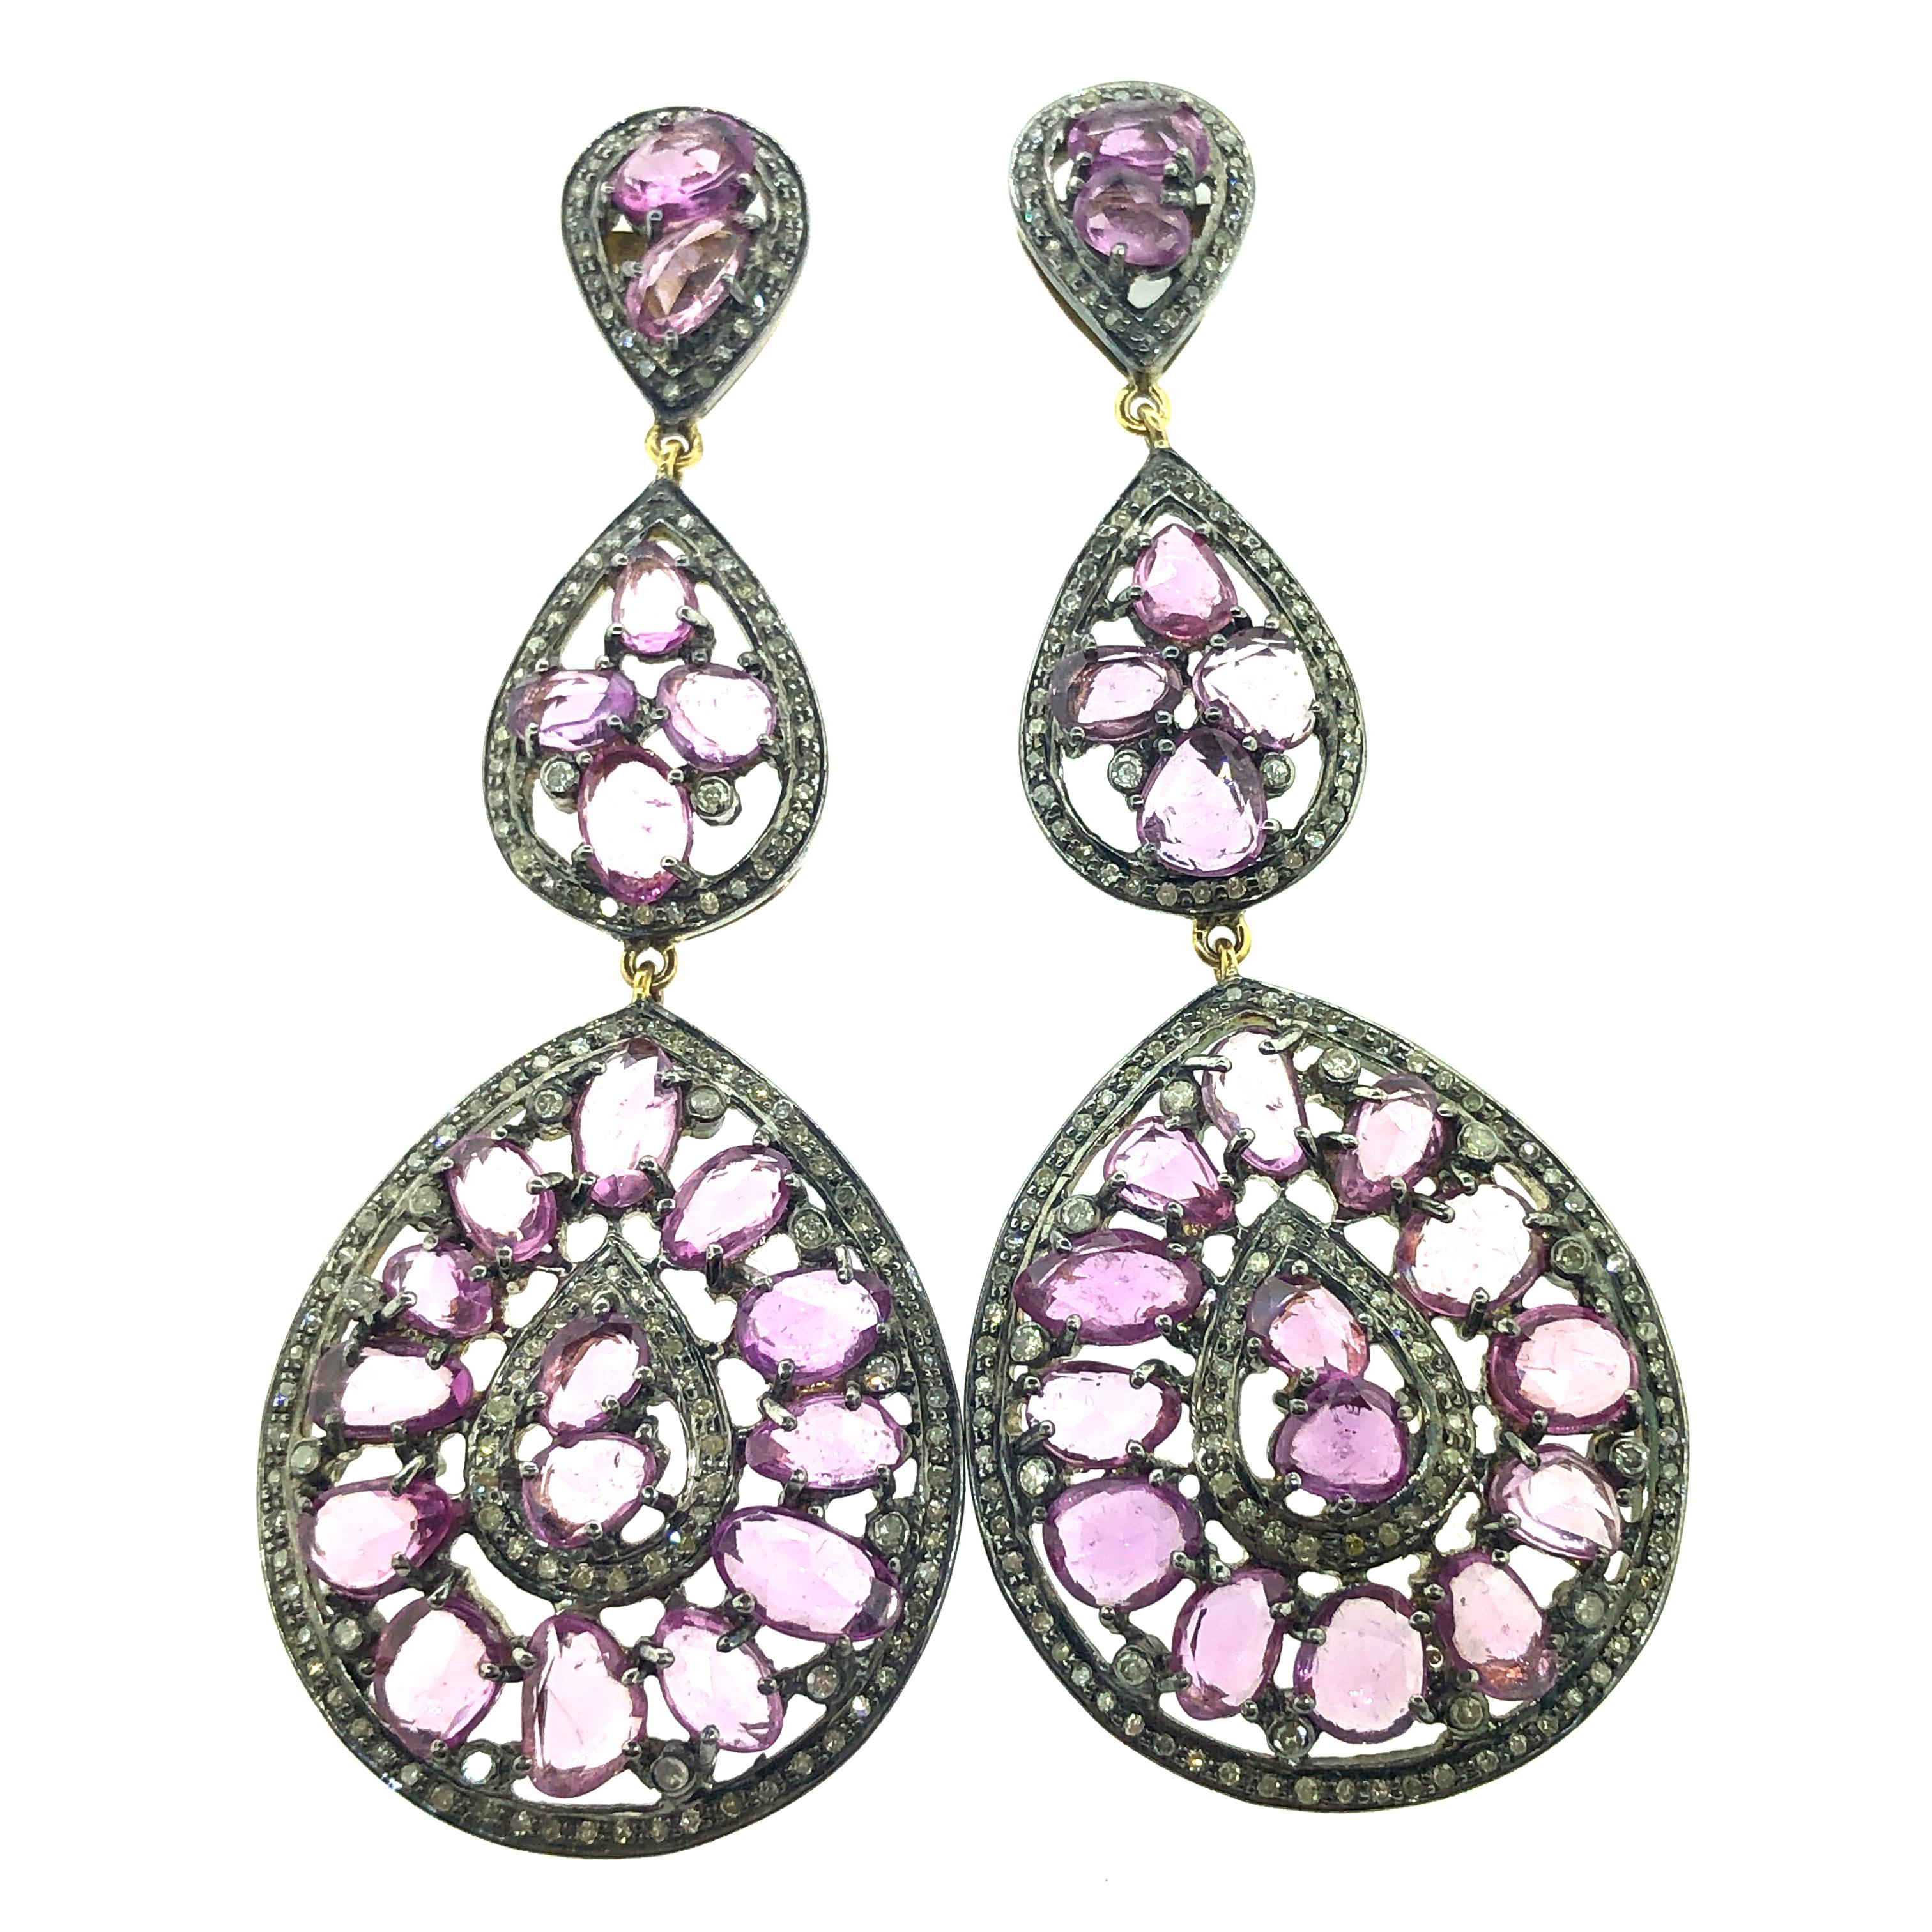 Rose Cut 20.01 Carat Pink Sapphire, Diamond Earring Oxidized Sterling Silver, 14K Gold For Sale